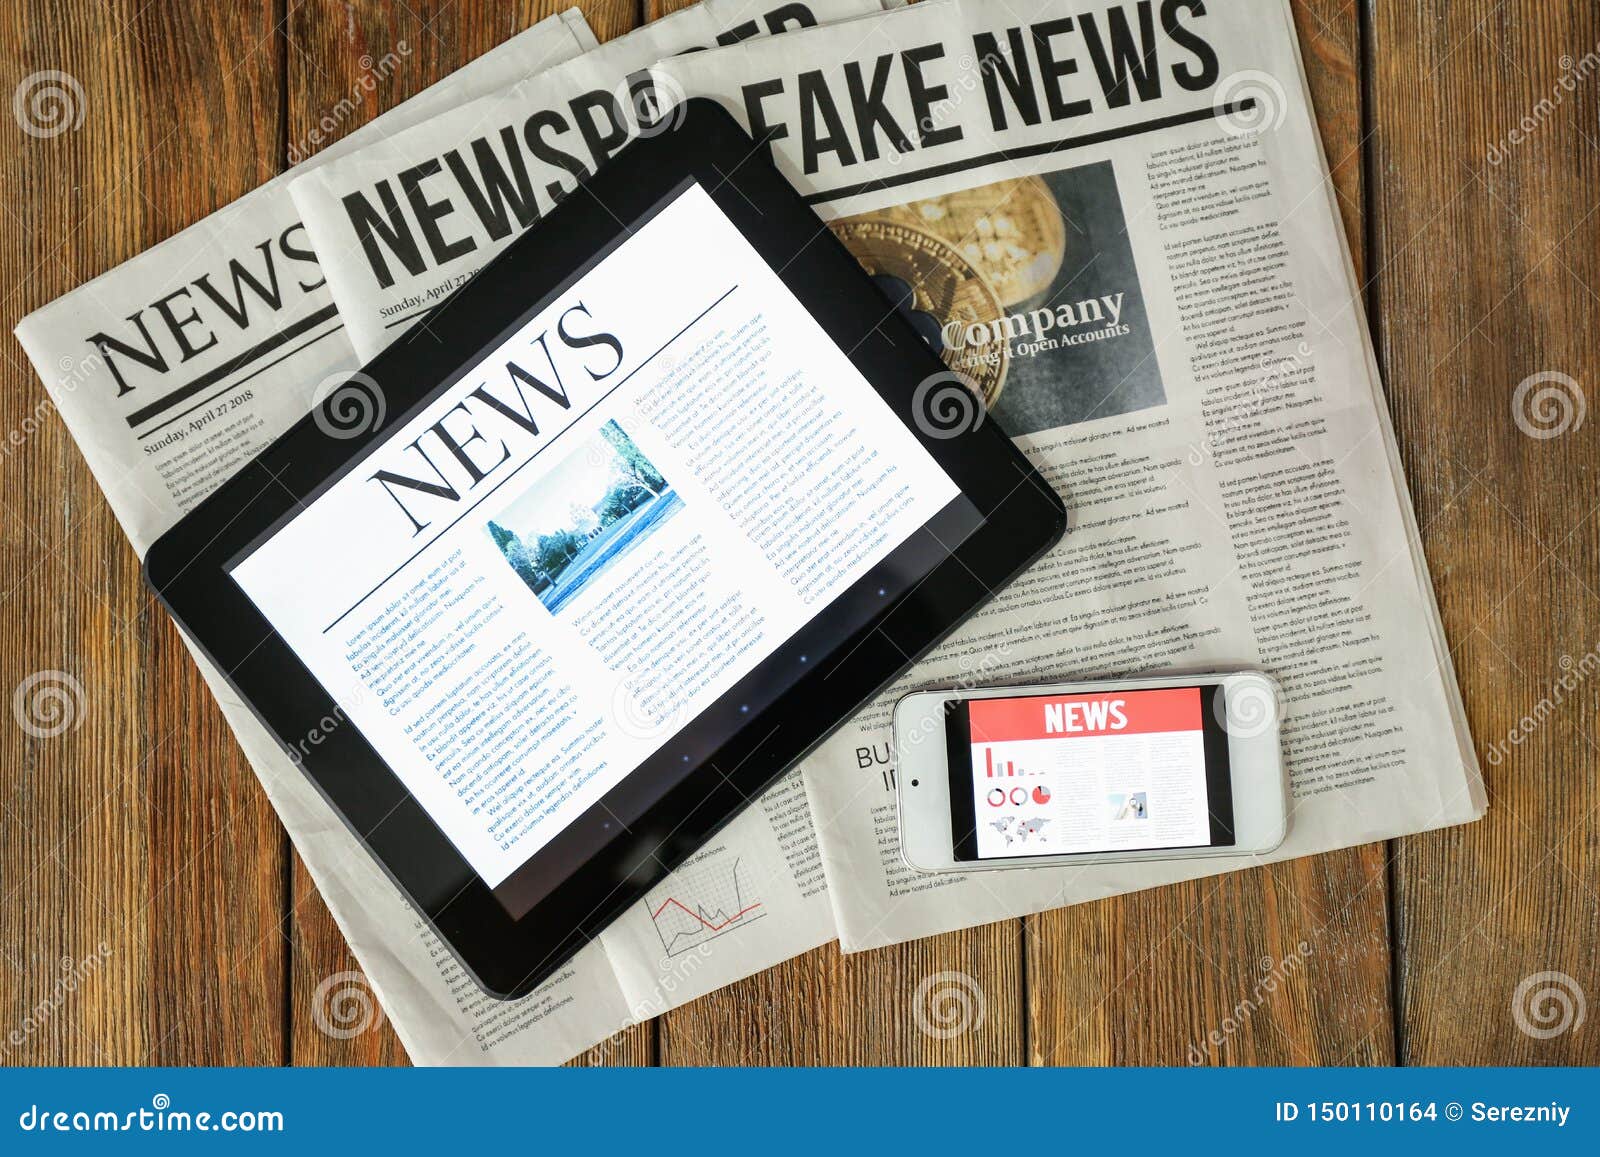 newspapers, tablet computer and phone with news on screen on wooden table